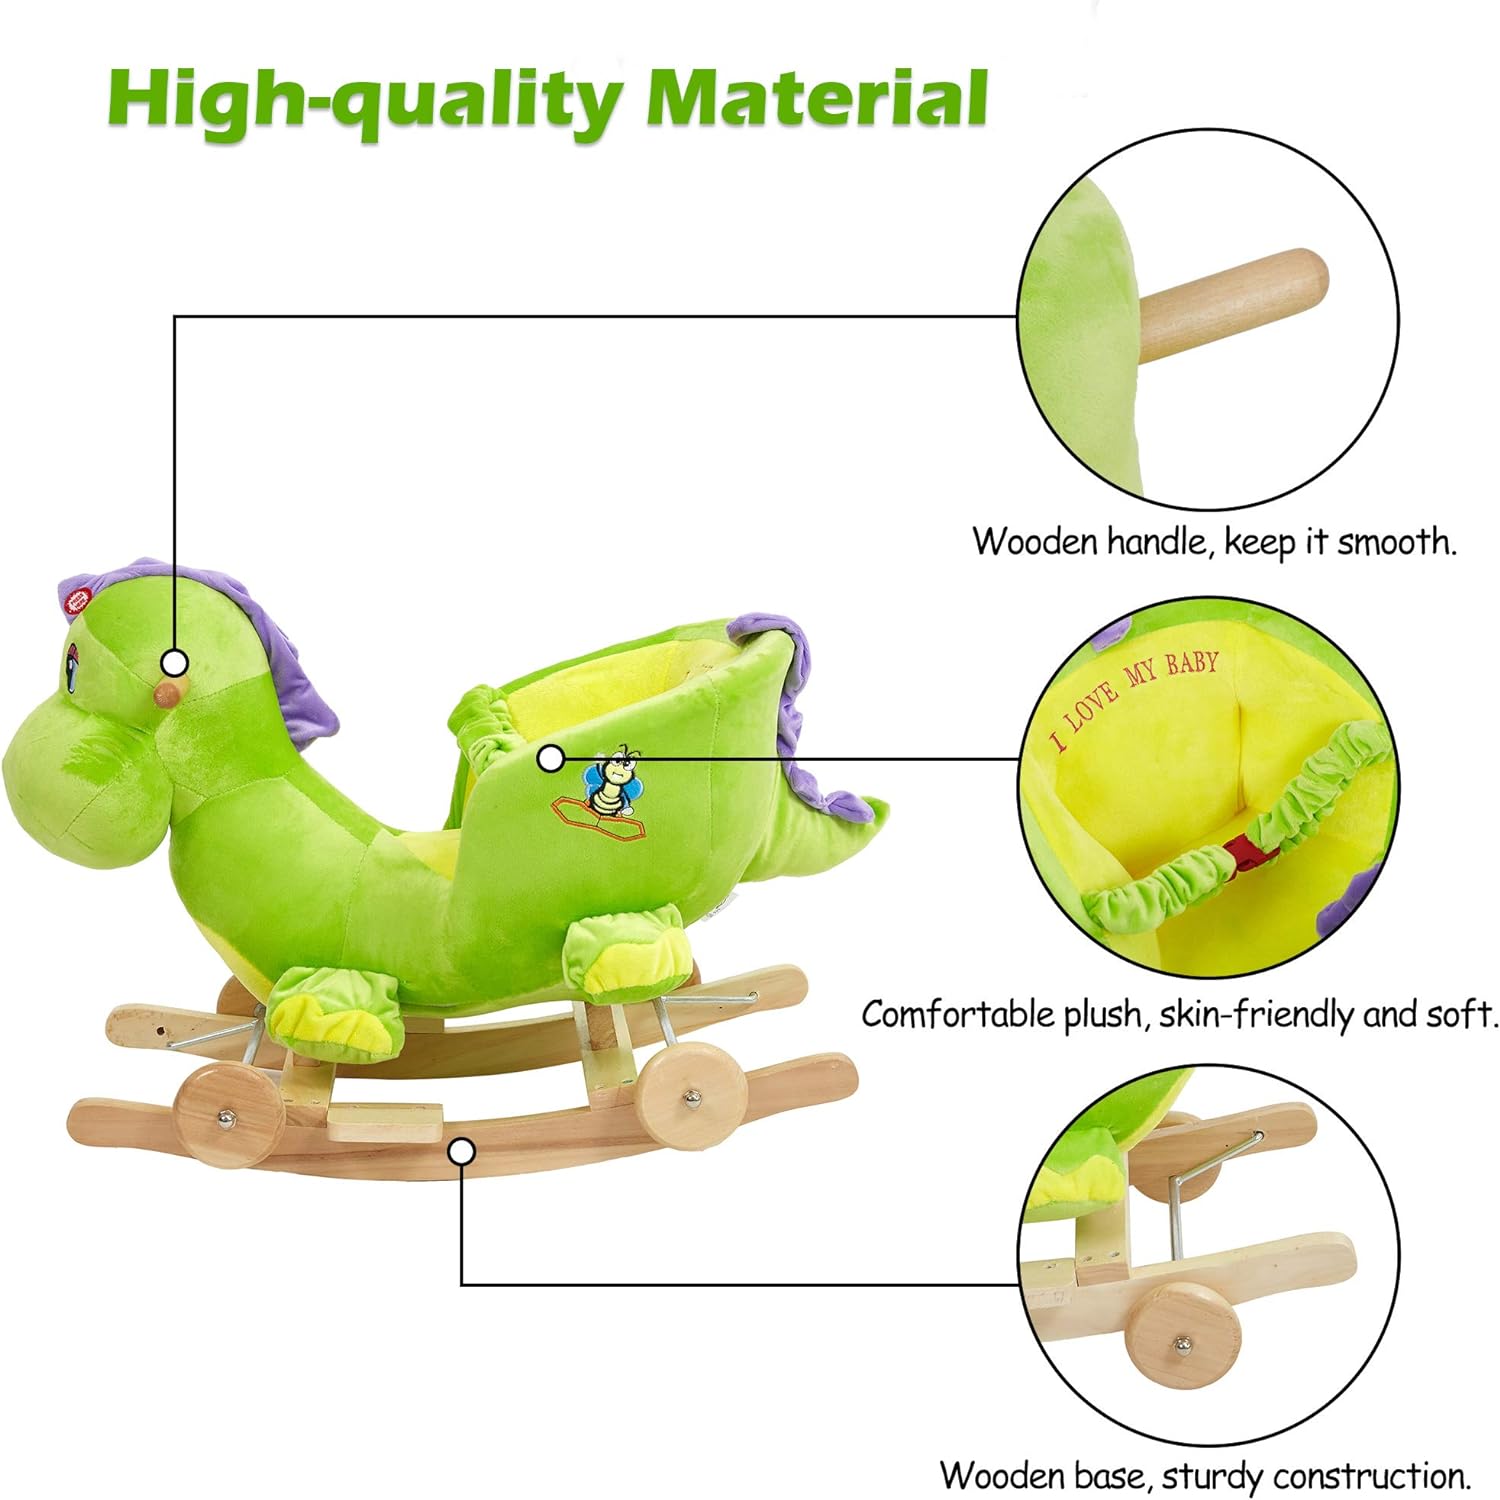 2-in-1 Ride-on Wooden Plush Rocking Horse Chair with Music for Baby Kids Toddlers, Green Dinosaur - Luckyermore